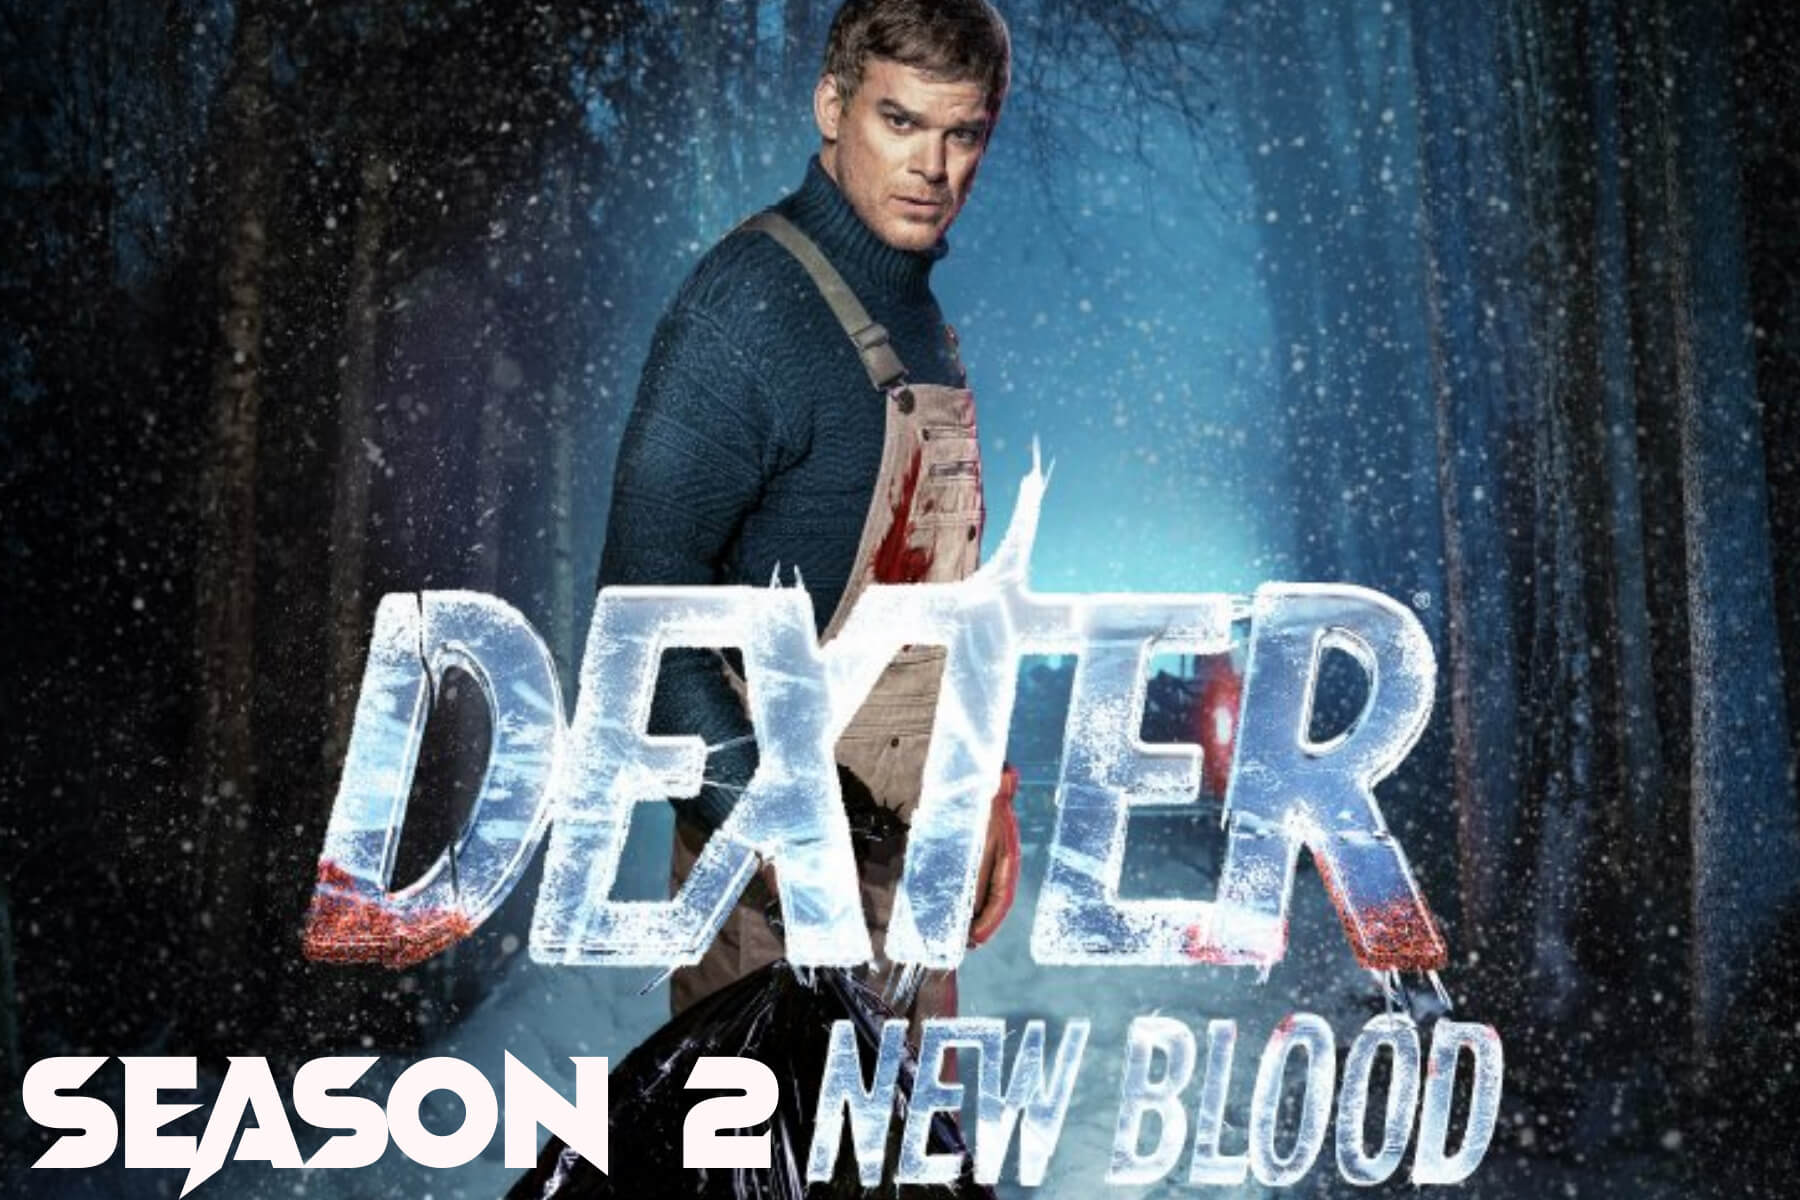 Is There Any News Of Dexter: New Blood season 2 Trailer?